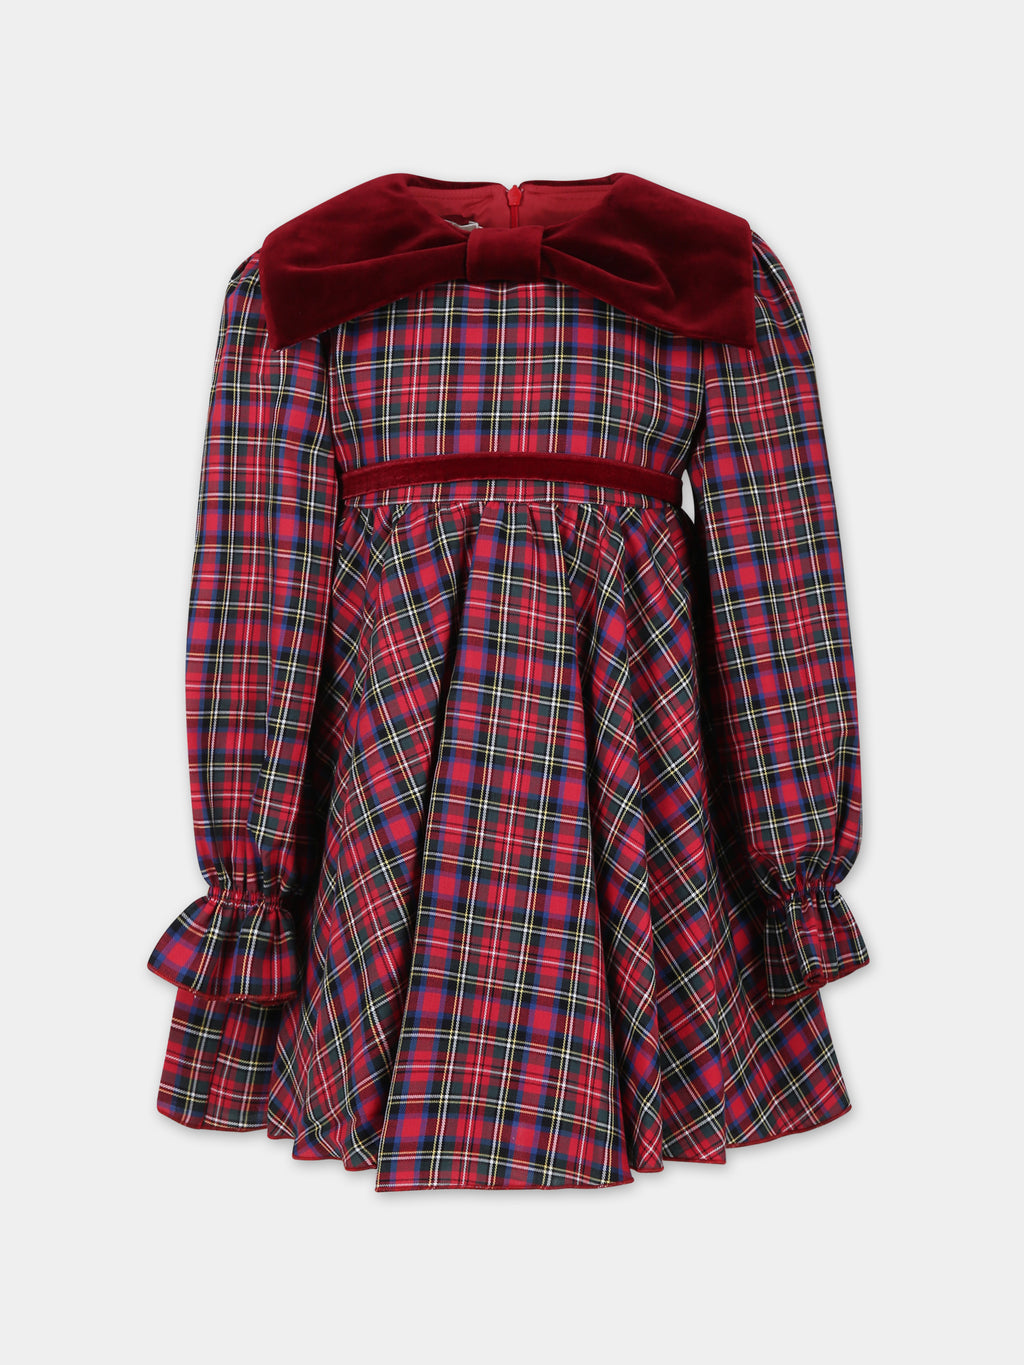 Elegant red dress for girls with checked pattern